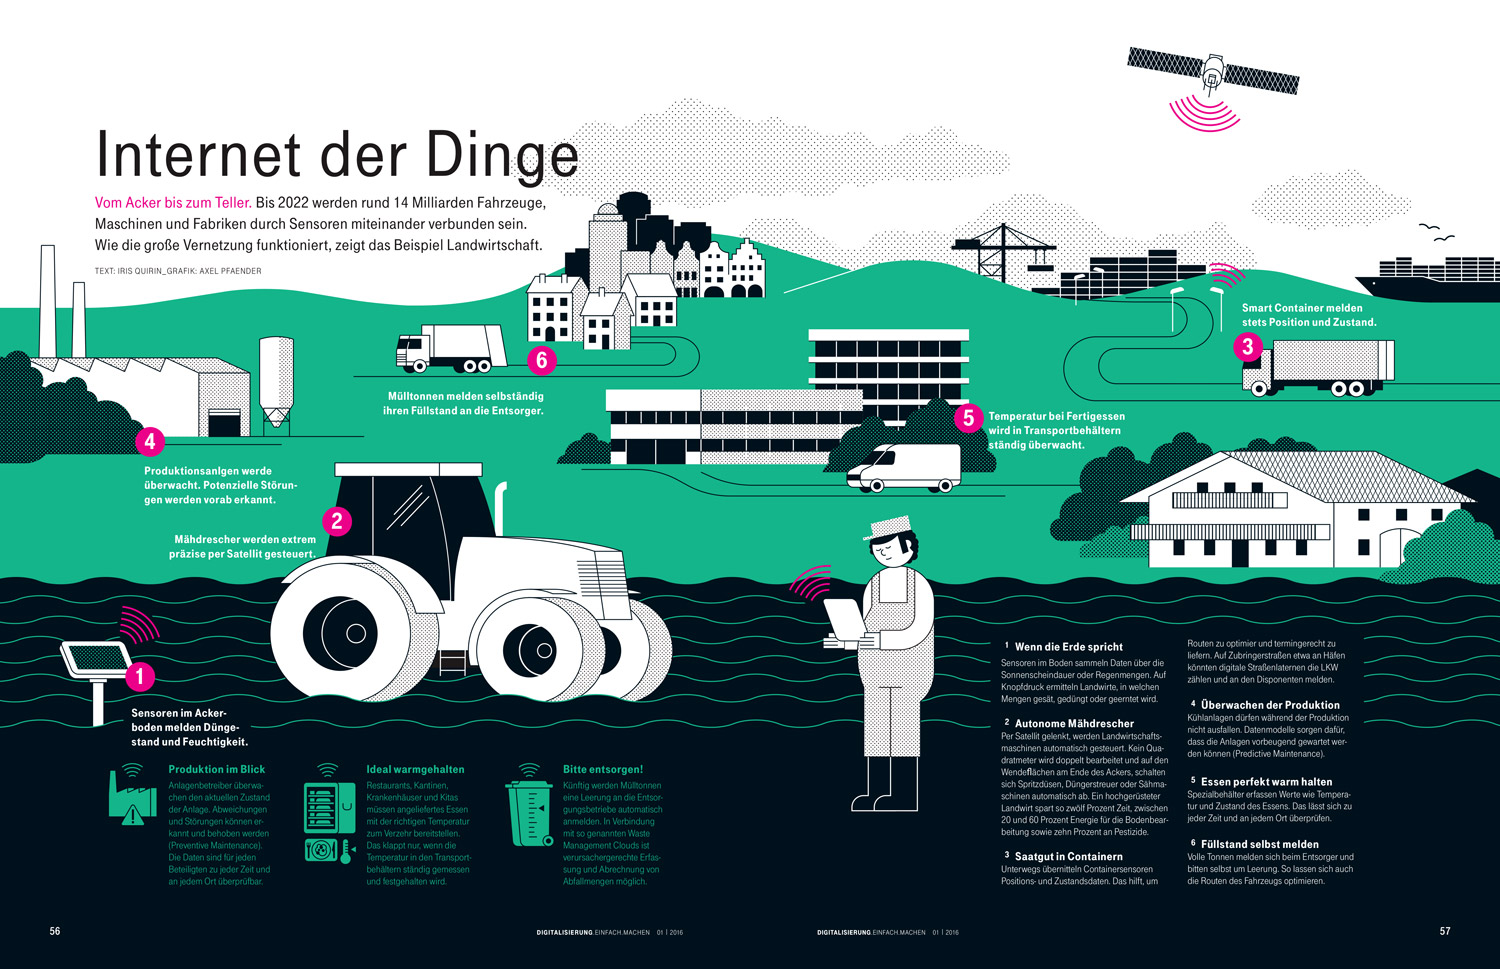 Detail from Internet of Things, Illustration by Axel Pfaender for Deutsche Telekom